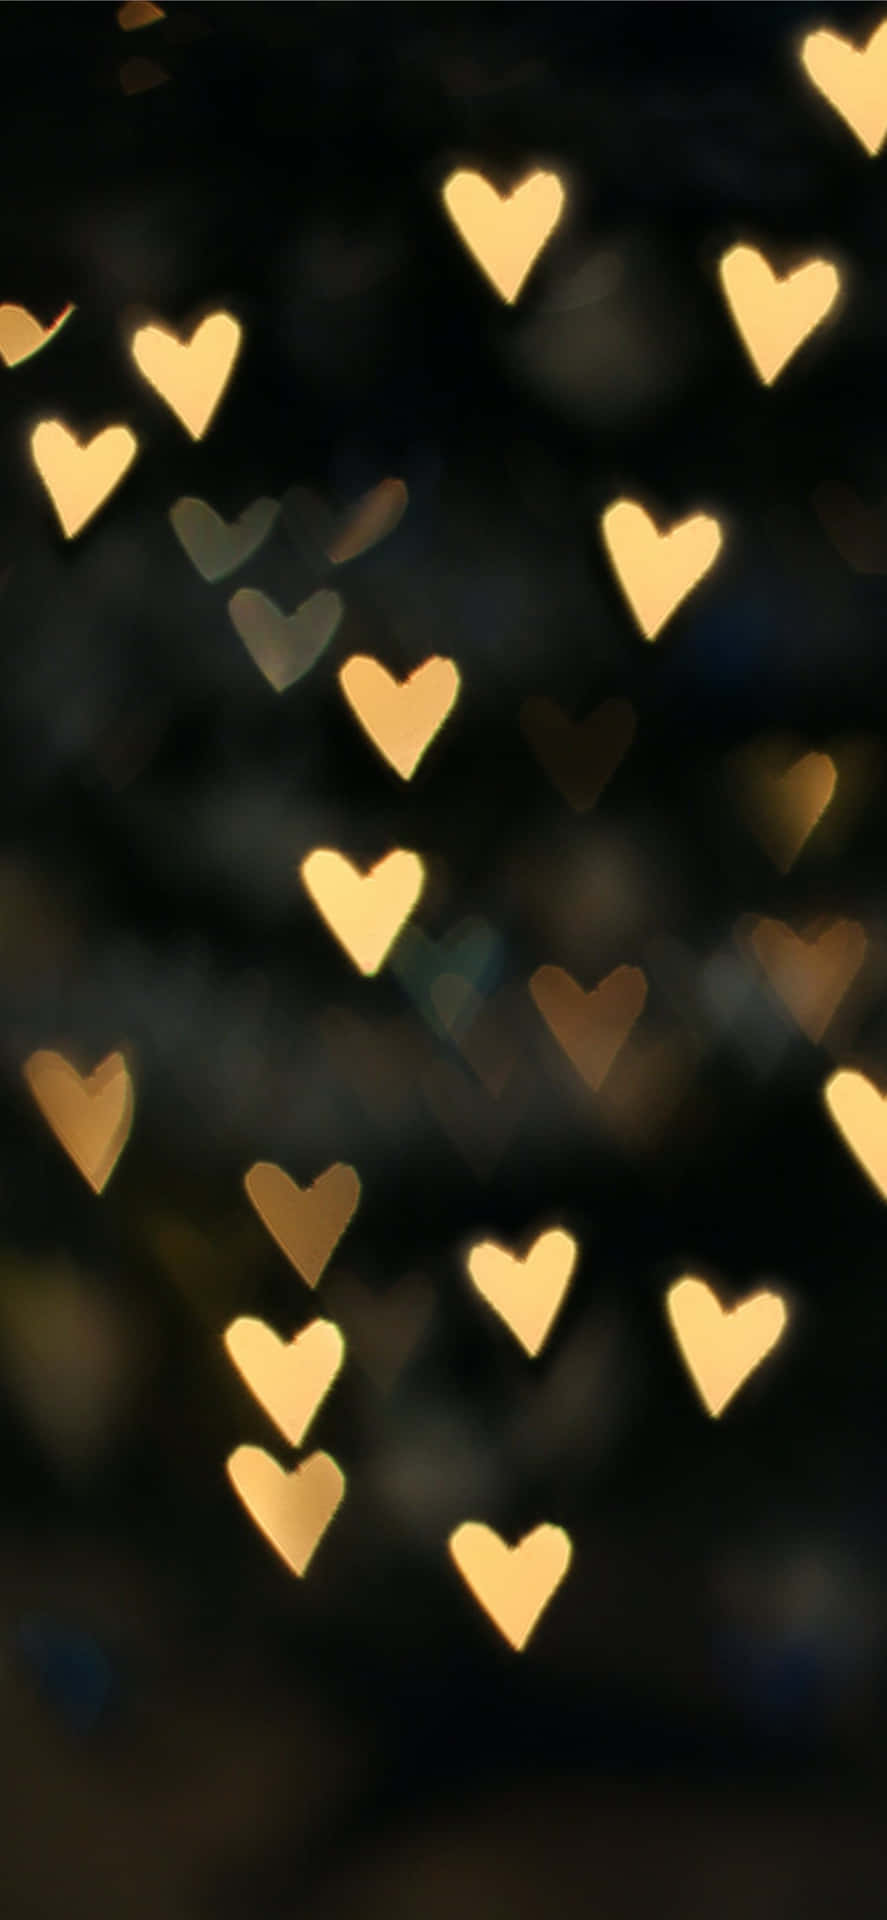 A Blurry Image Of Many Hearts In The Dark Wallpaper